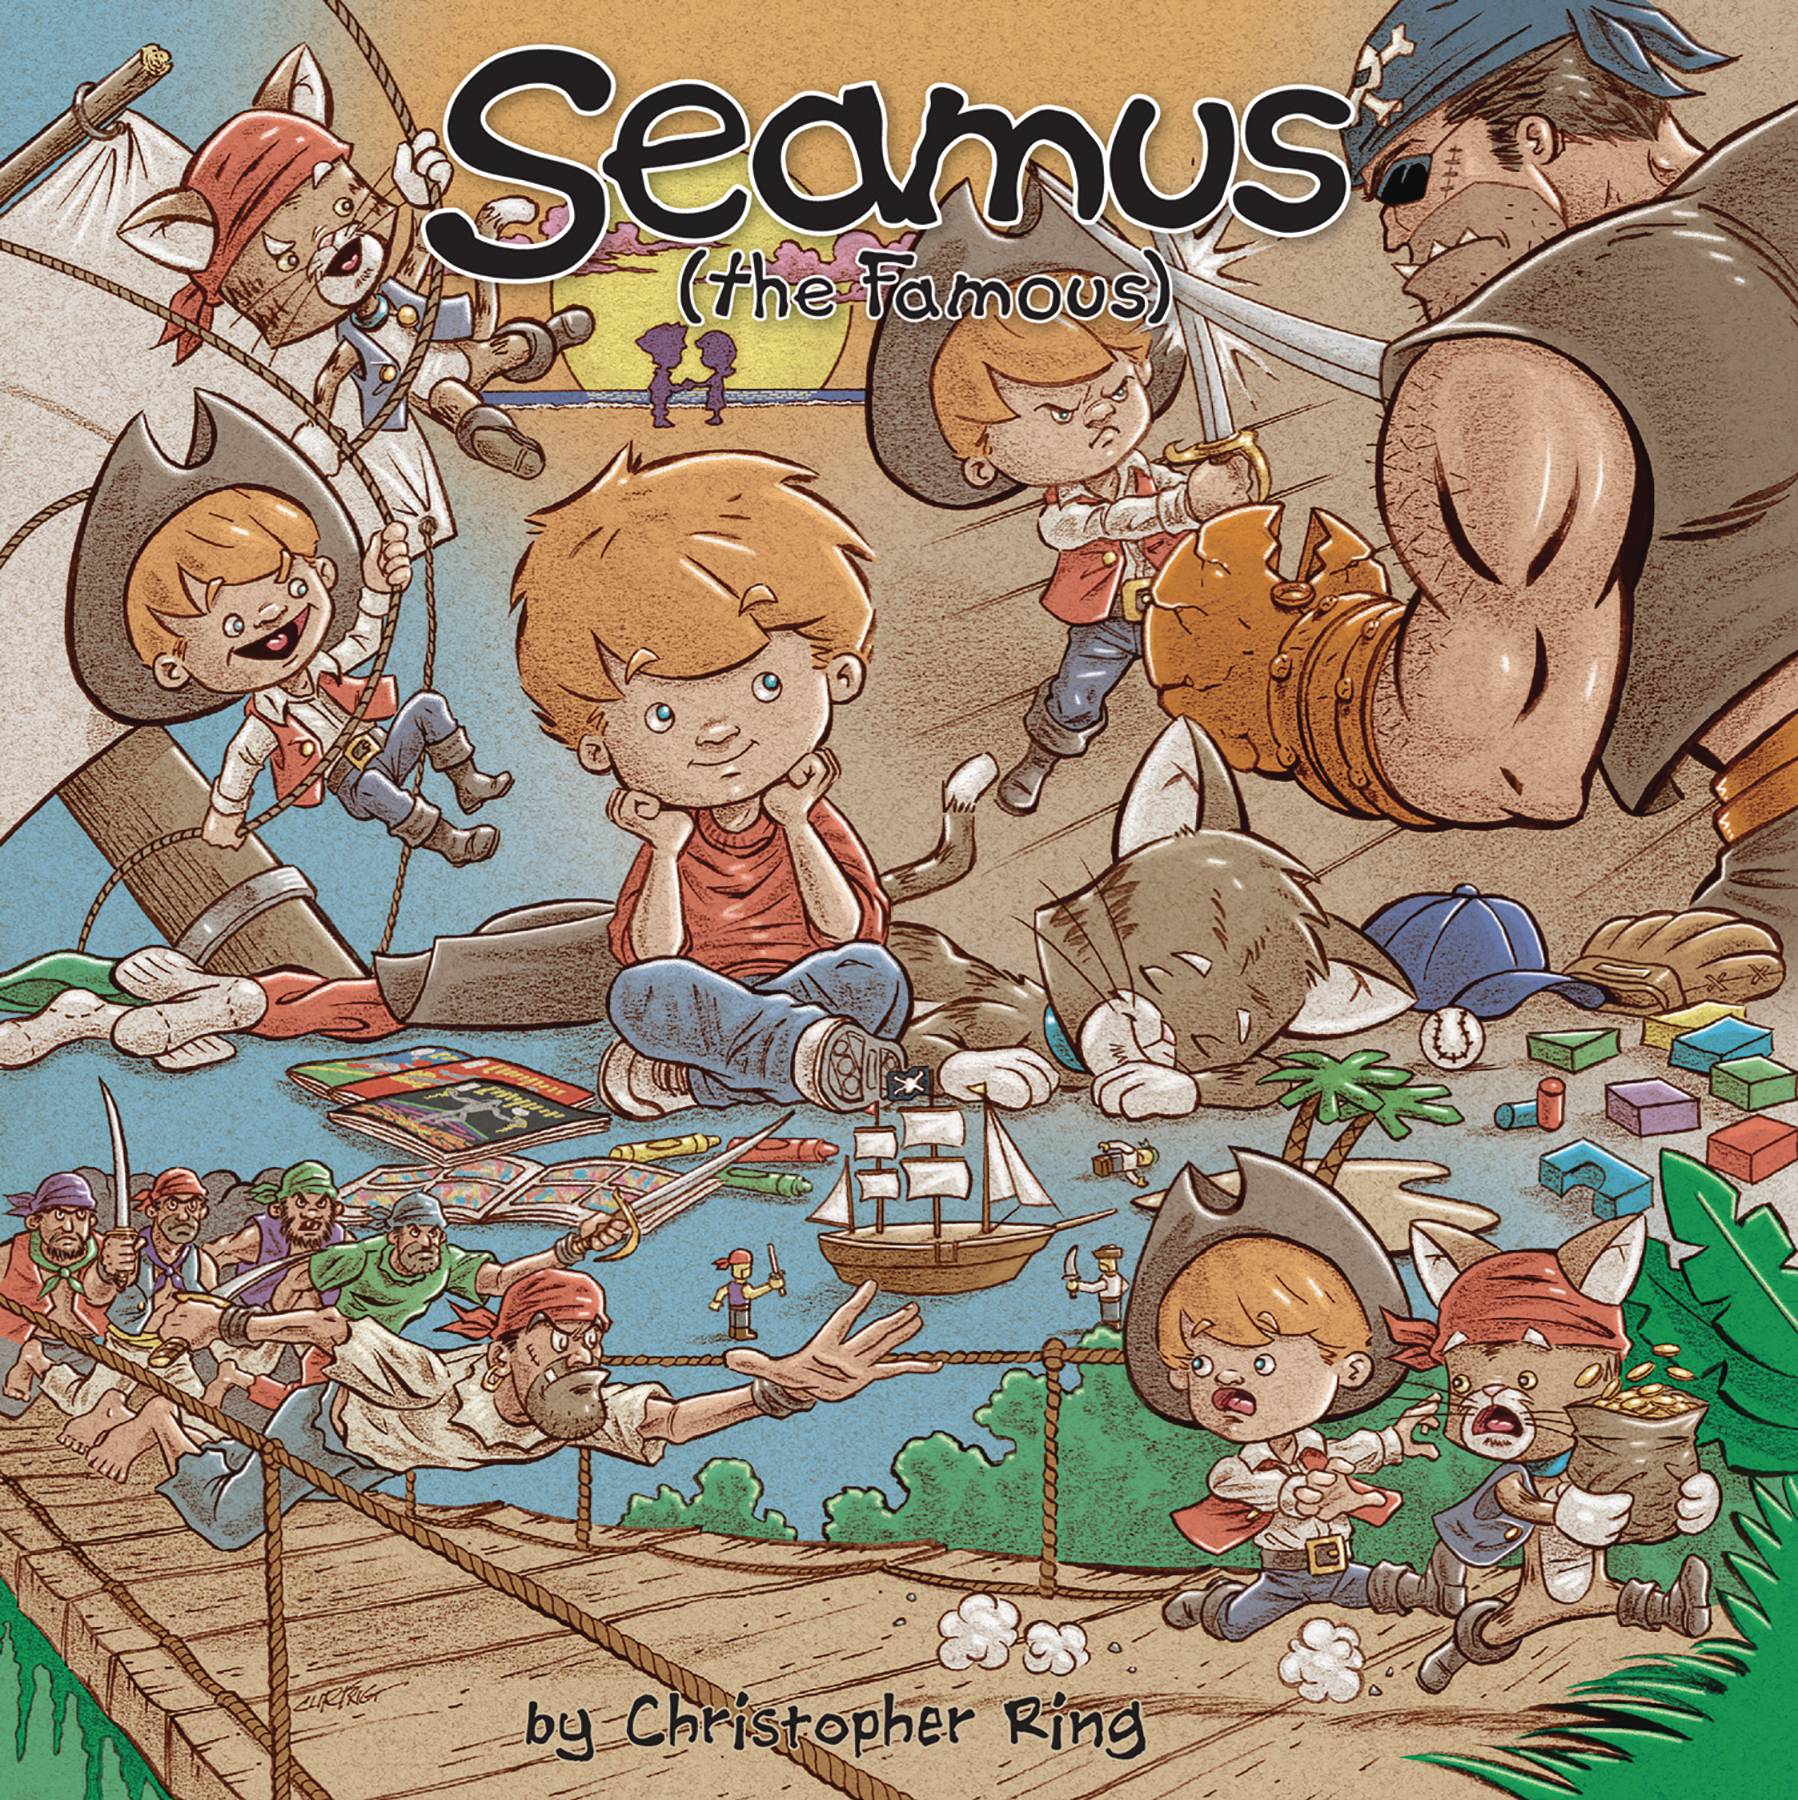 A young ginger-haired boy sits next to a sleeping grey cat, looking thoughtful. Around him are scattered toys, comics and crayons, as well as representations of himself as a pirate, sword-fighting, stealing gold coins and swinging from sail ropes.